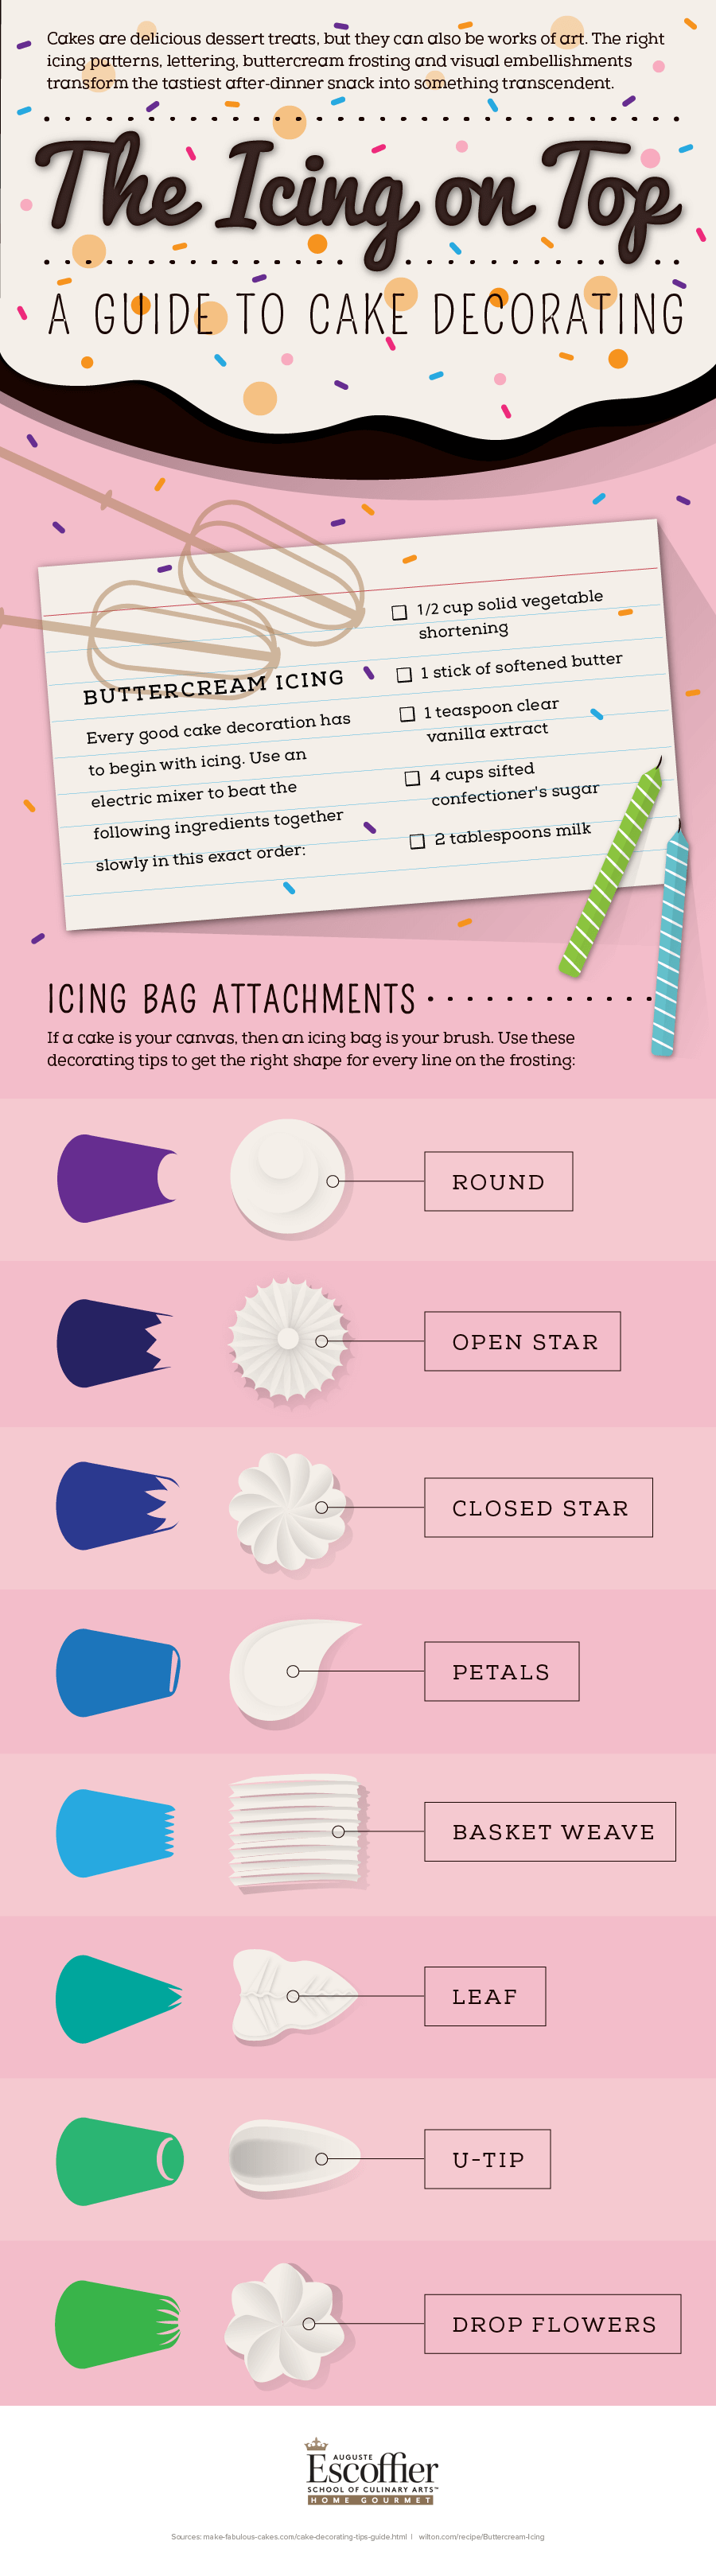 A Cake Decorating Guide Infographic